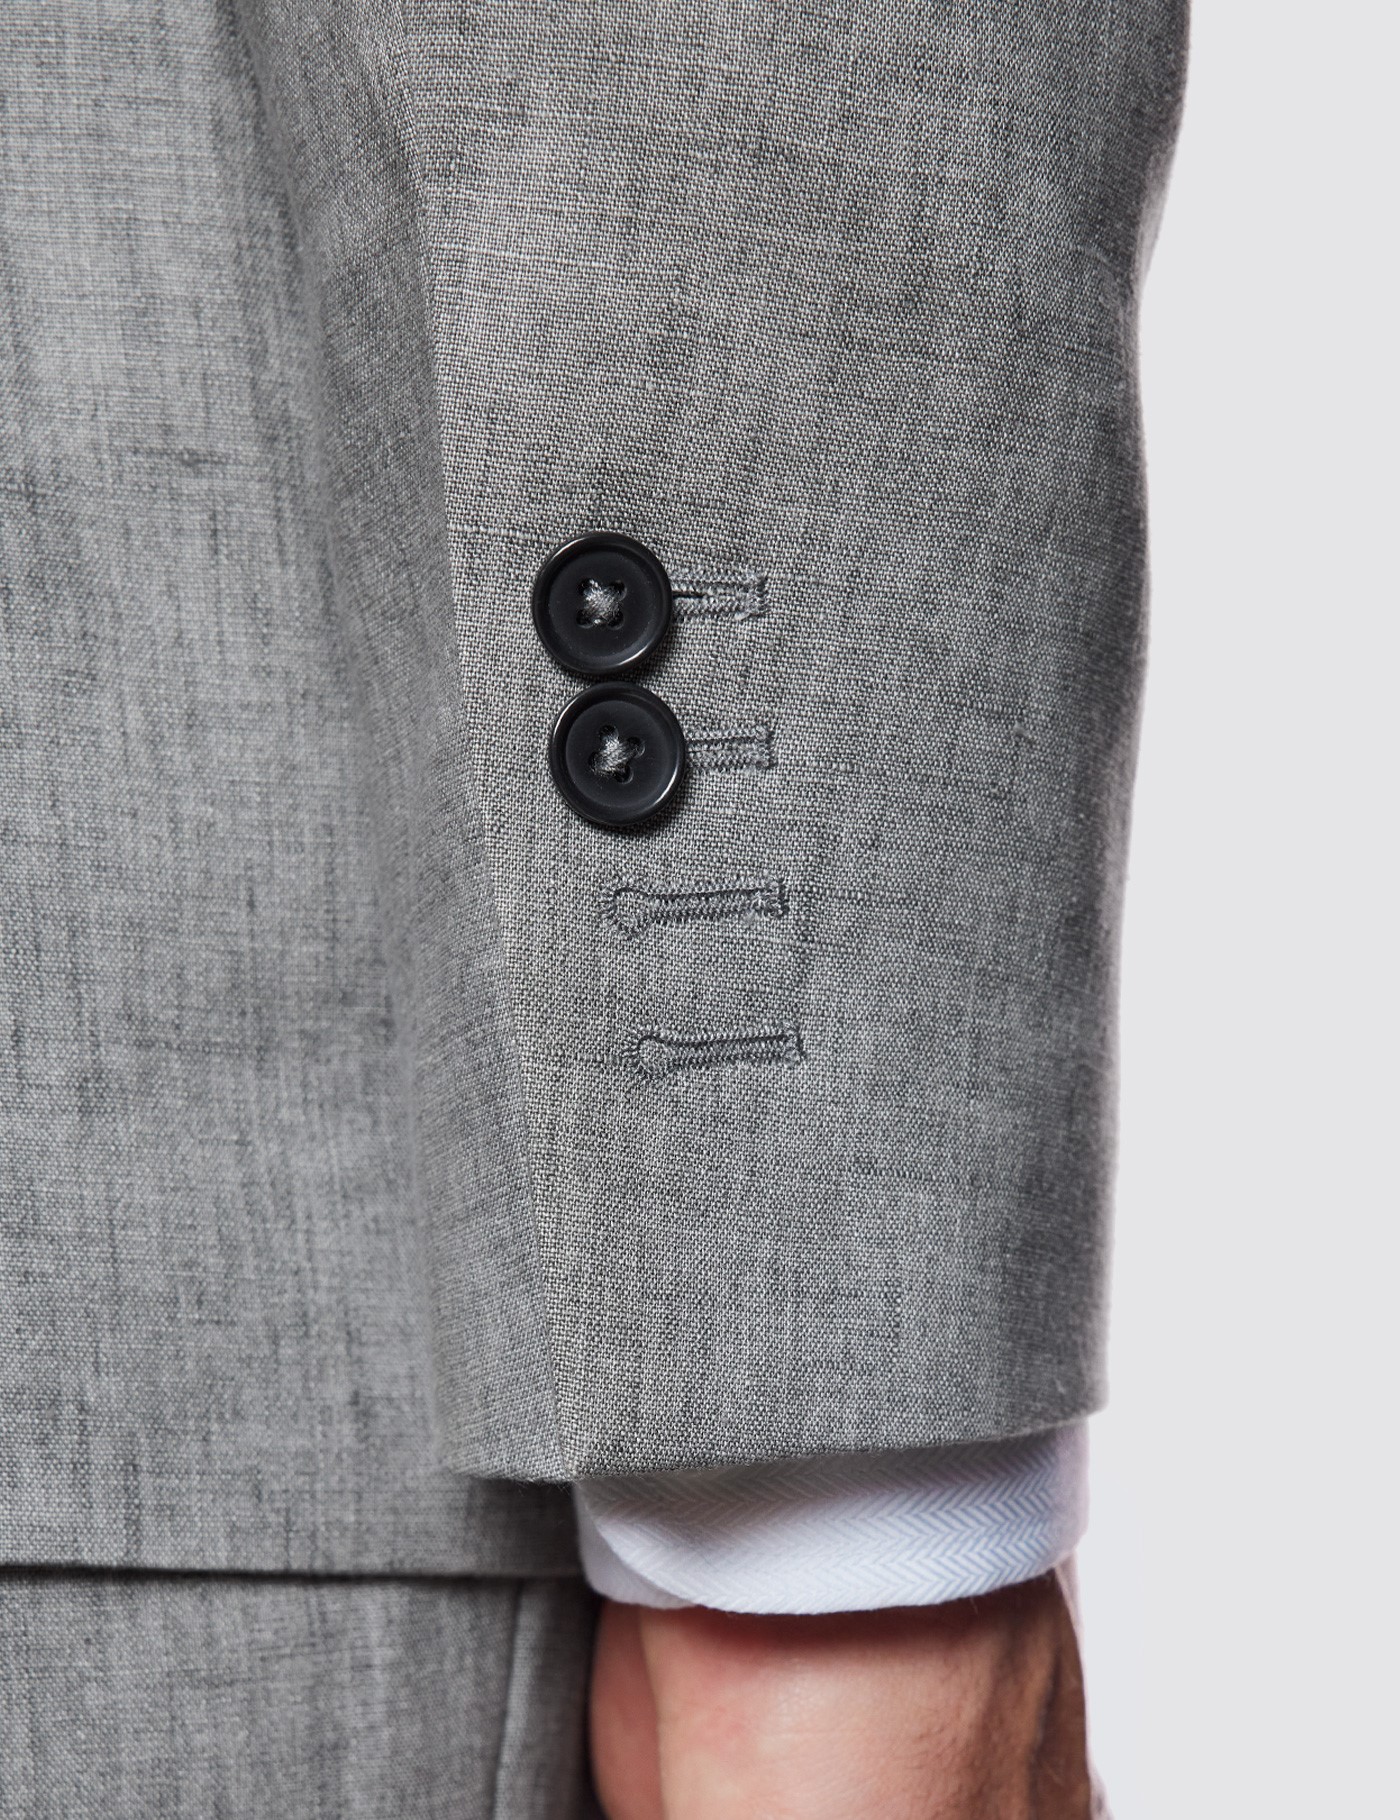 Men's Grey Linen Slim Fit Italian Suit - 1913 Collection | Hawes and Curtis